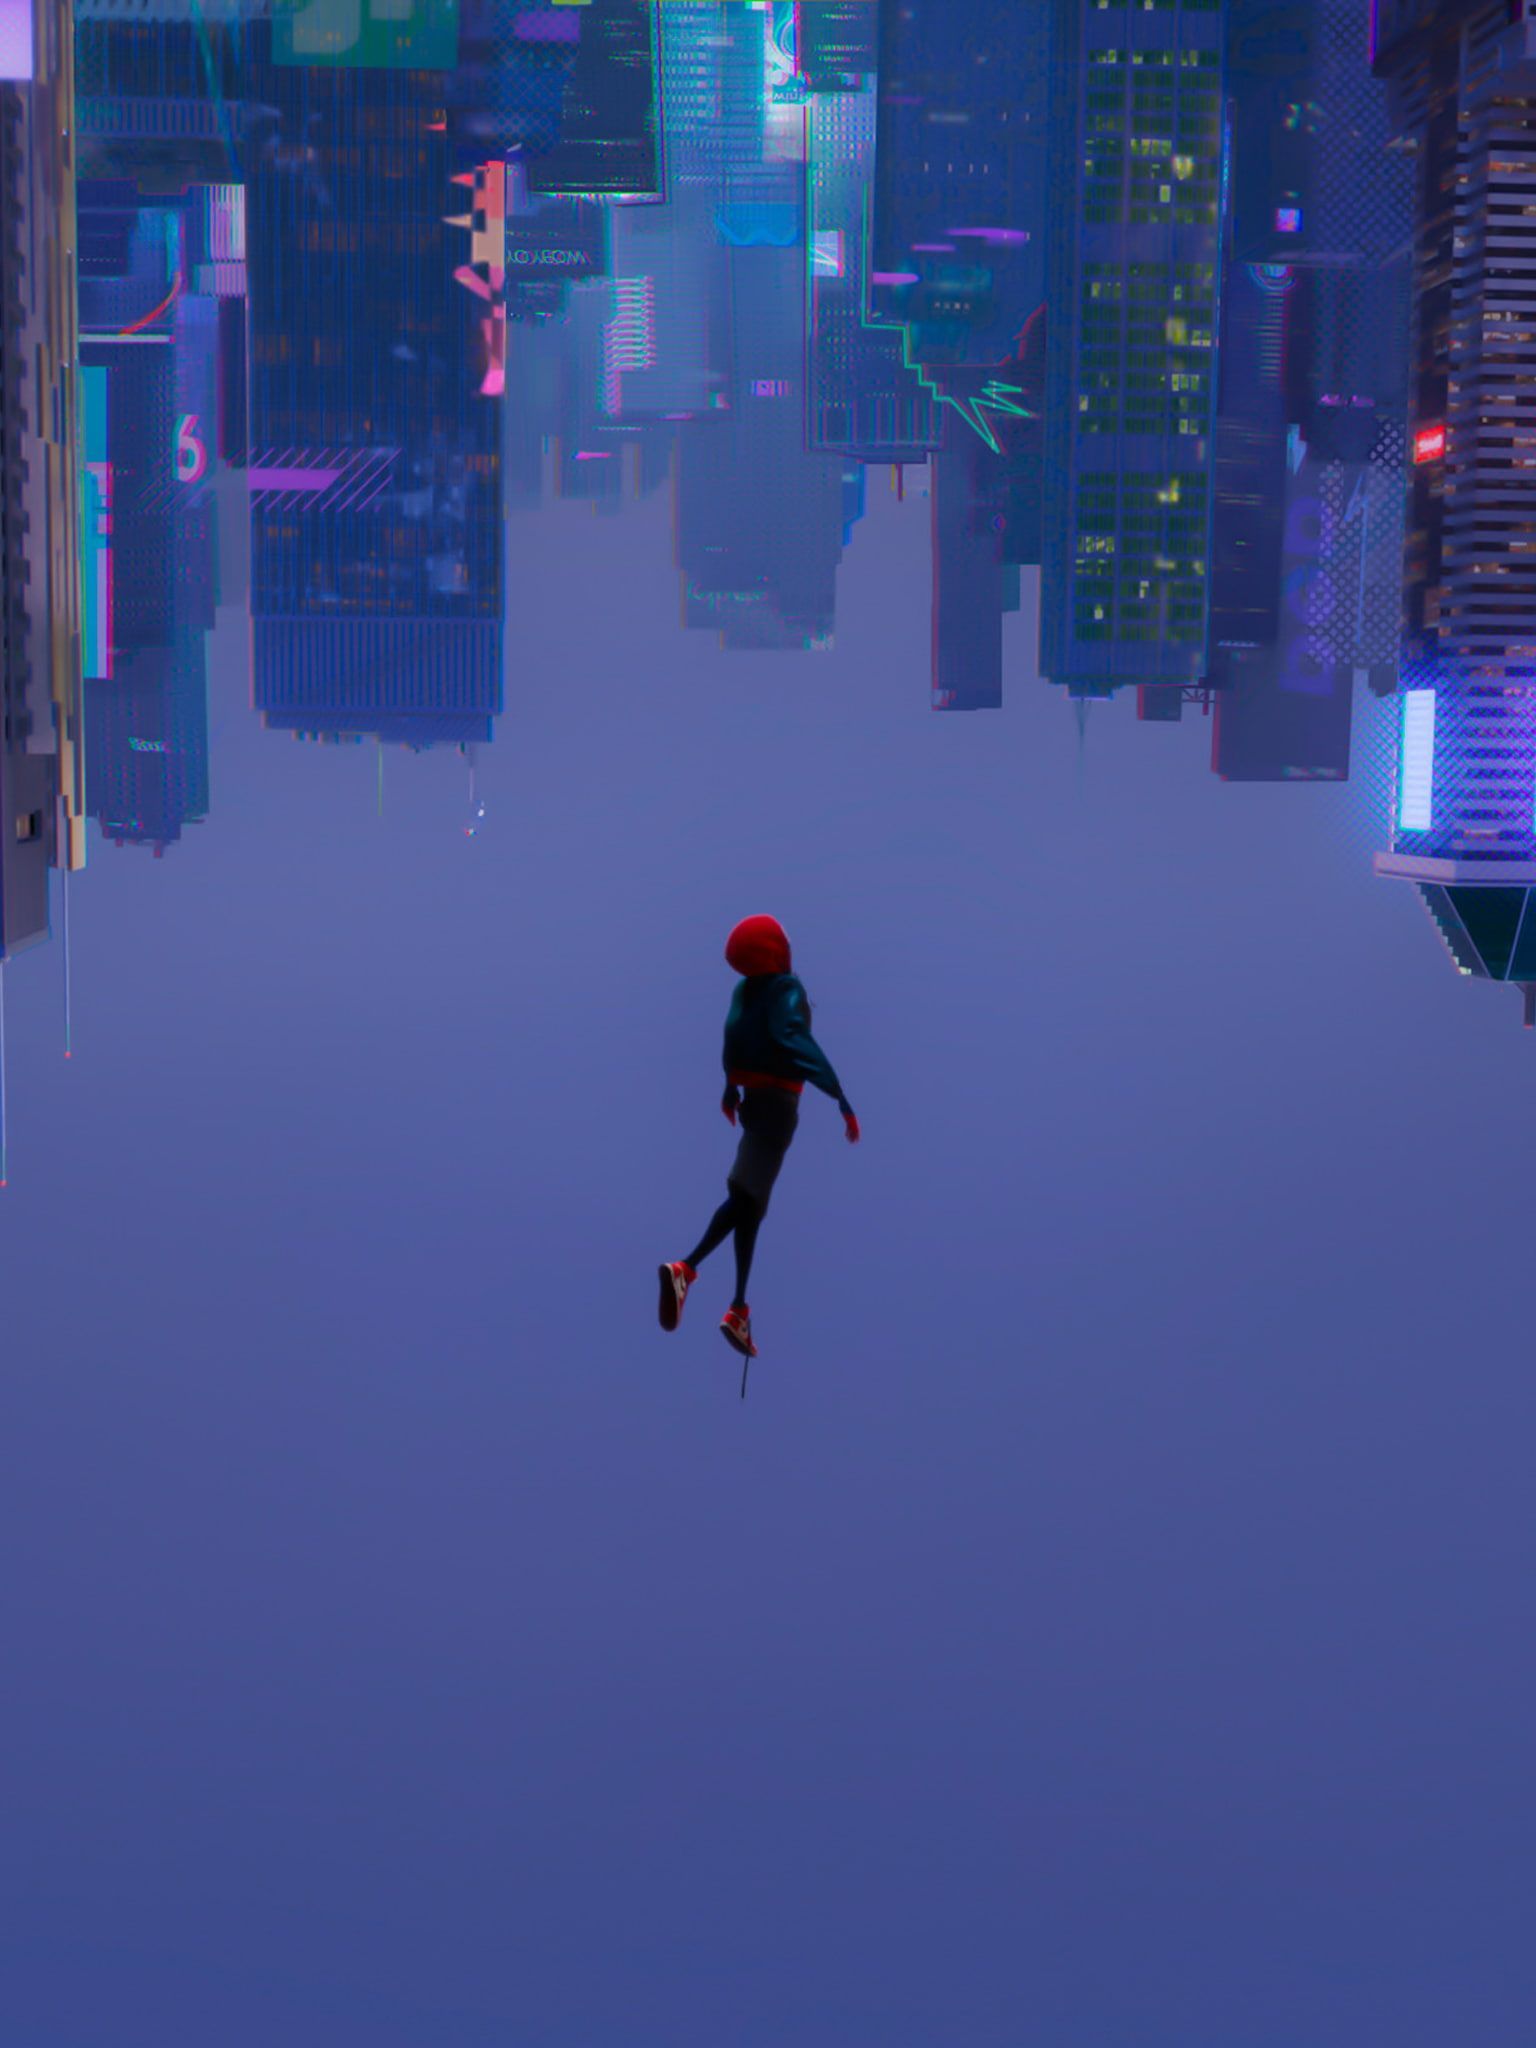 Top 999+ Miles Morales Wallpaper Full HD, 4K✓Free to Use